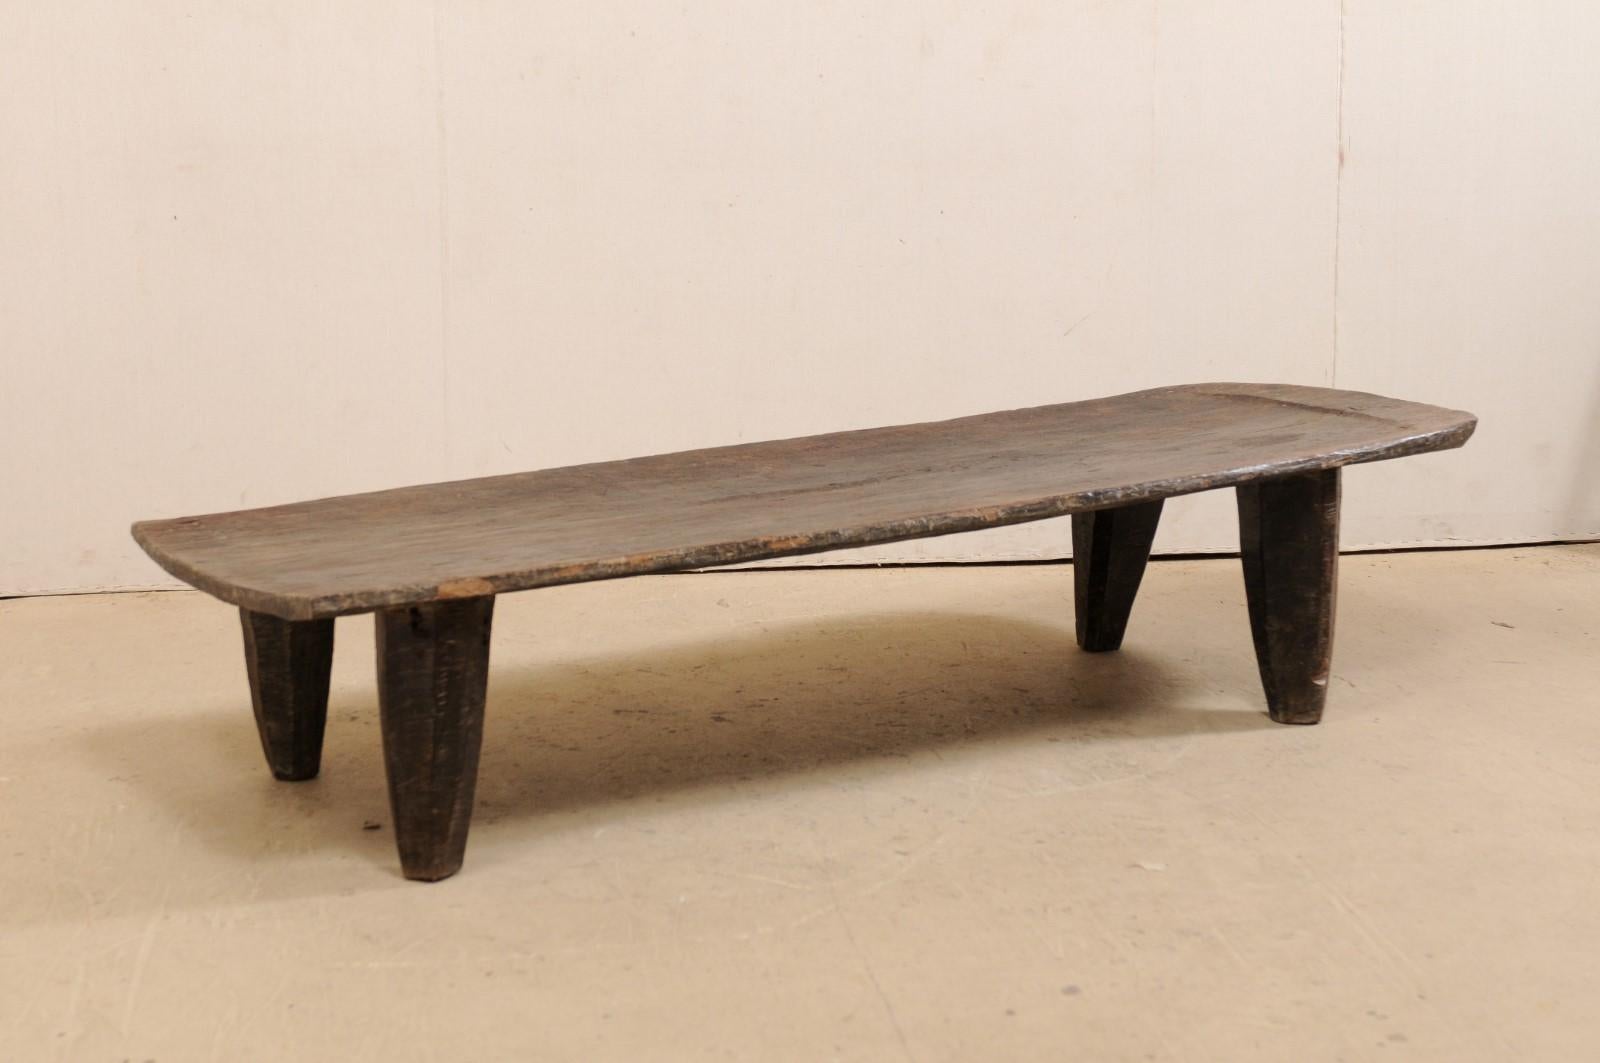 A hand-carved wood Naga coffee table from the early 20th century. This wooden bed from the Naga tribes of Nagaland, North East India has been carved out of a single log and would make for a great coffee table and conversational piece. Very nice